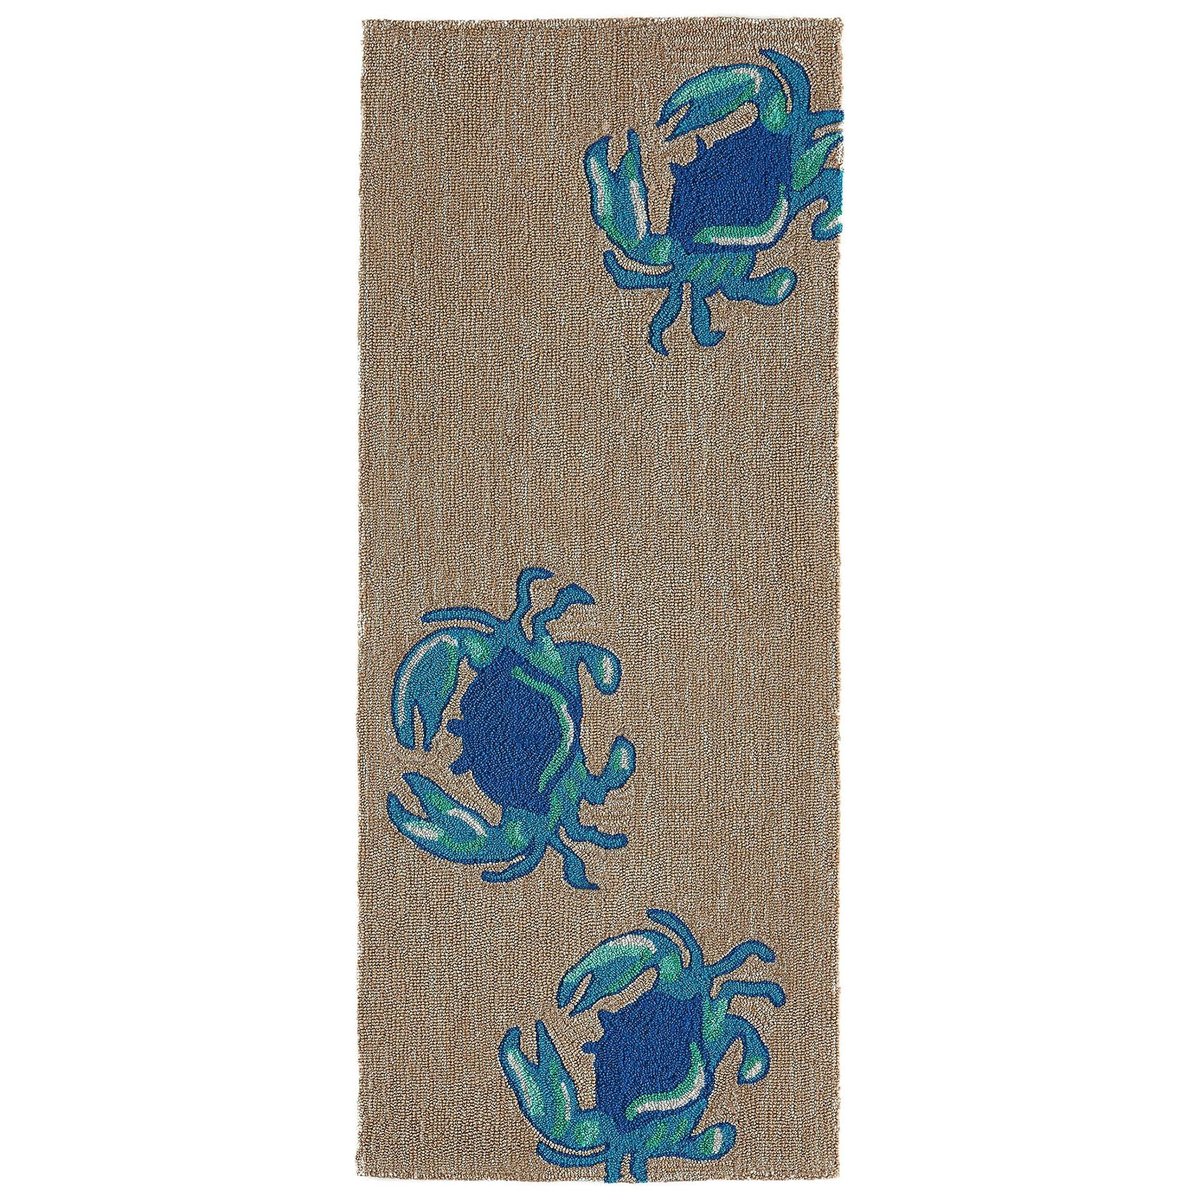 3 Sizes Available Frontporch Crabs Blue Rugs Indoor/Outdoor Liora Manne 